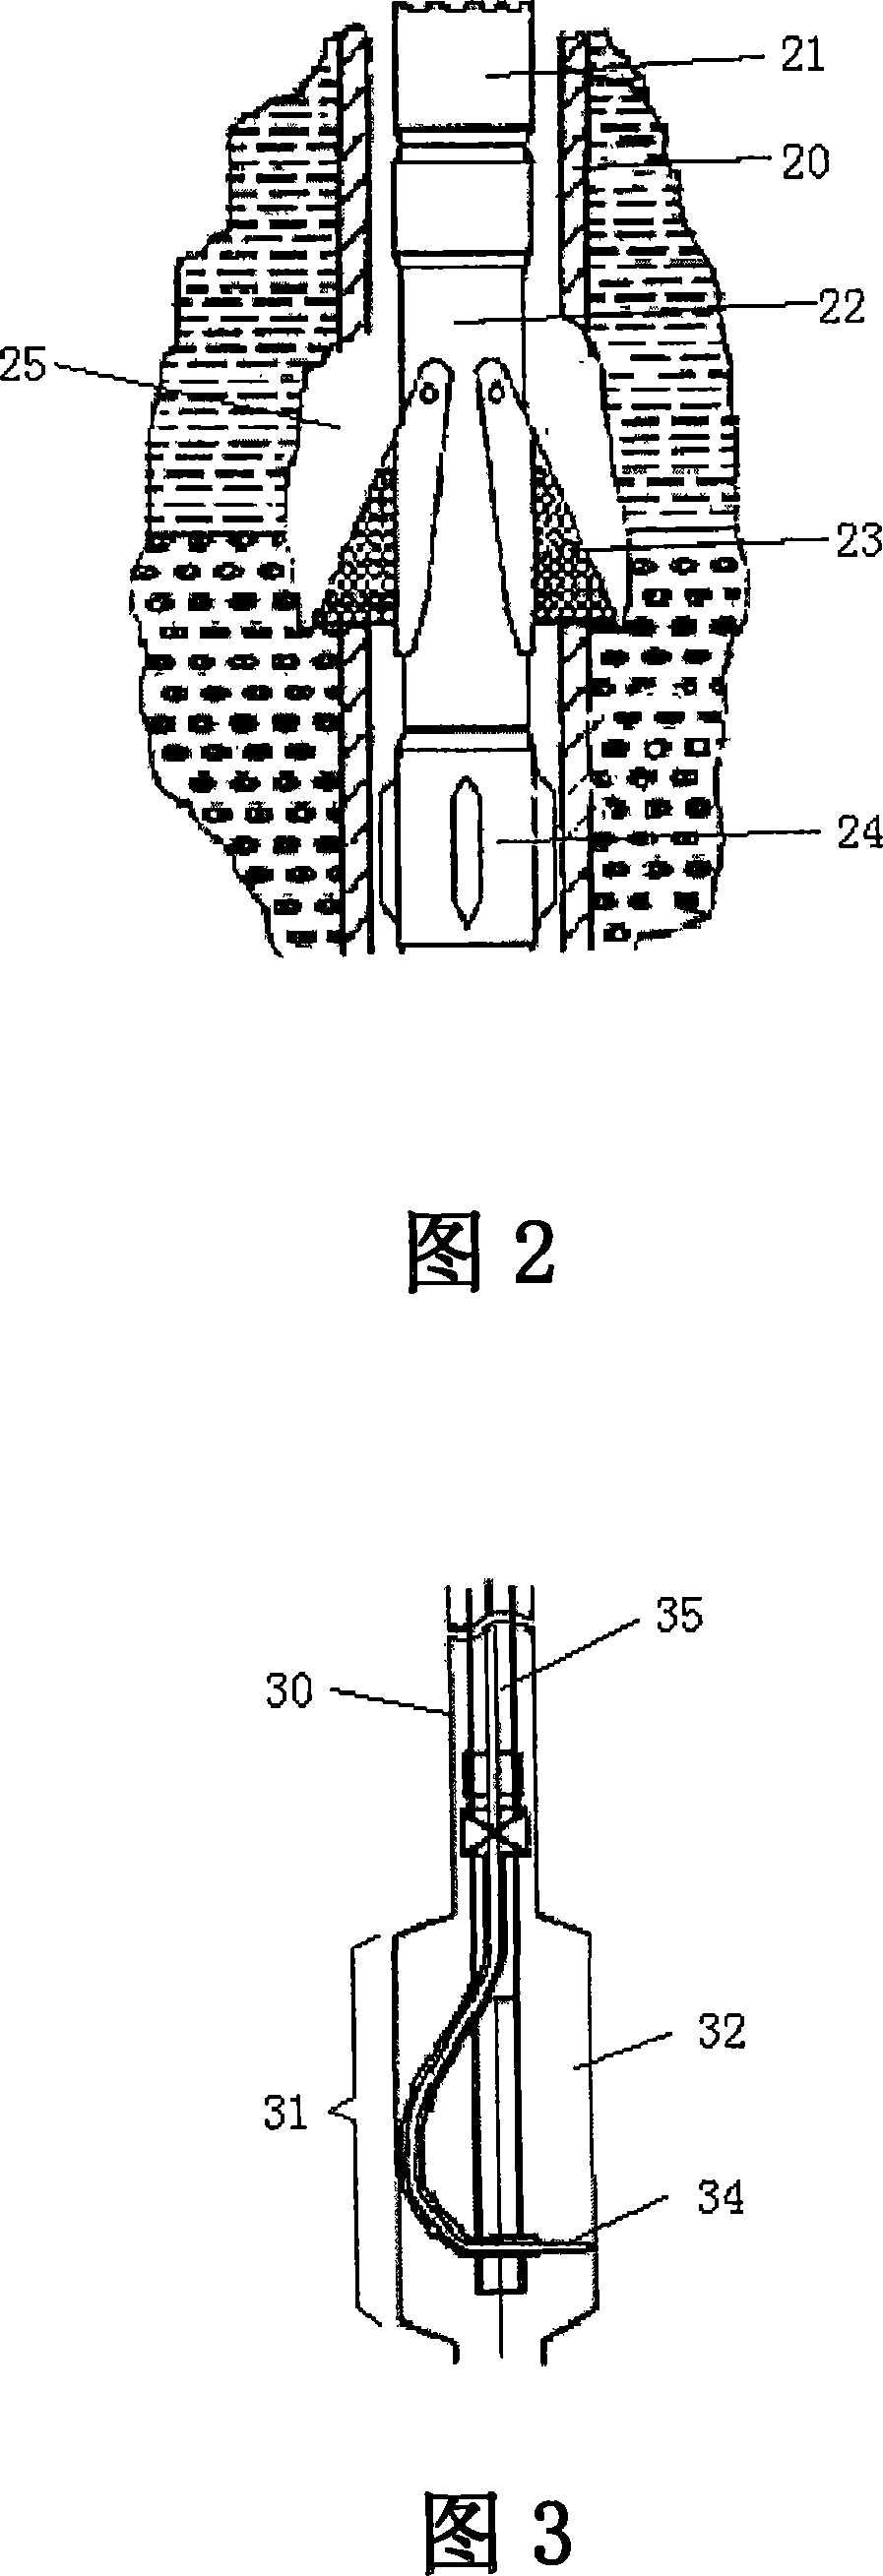 Method and apparatus for hydraulic jet side drilling for radial branching borehole